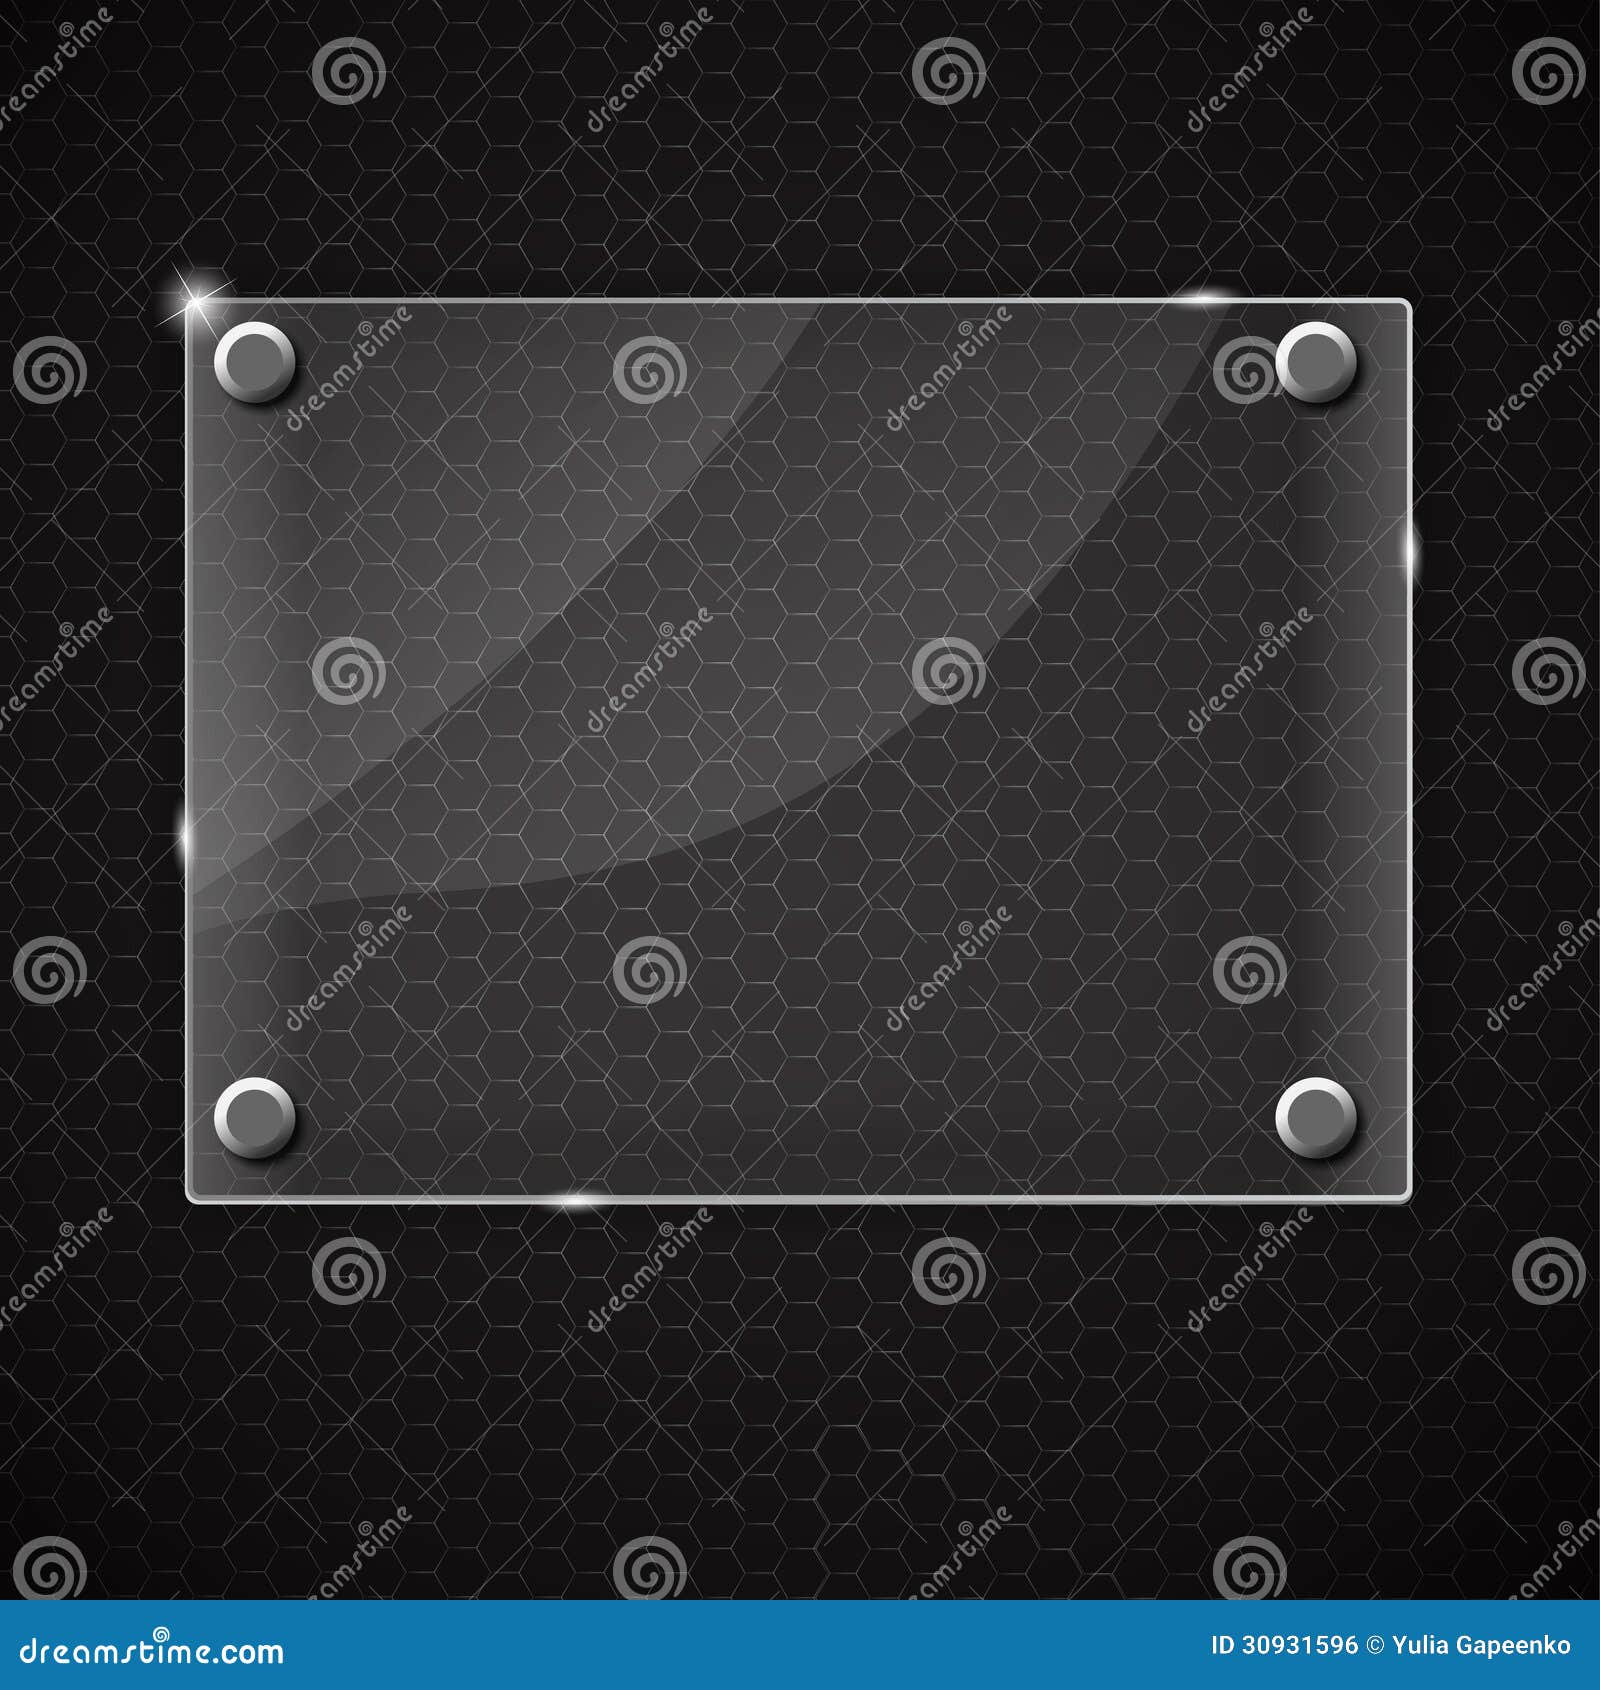 Glass frame on abstract metal background. Vector illustration. This is file of EPS10 format.